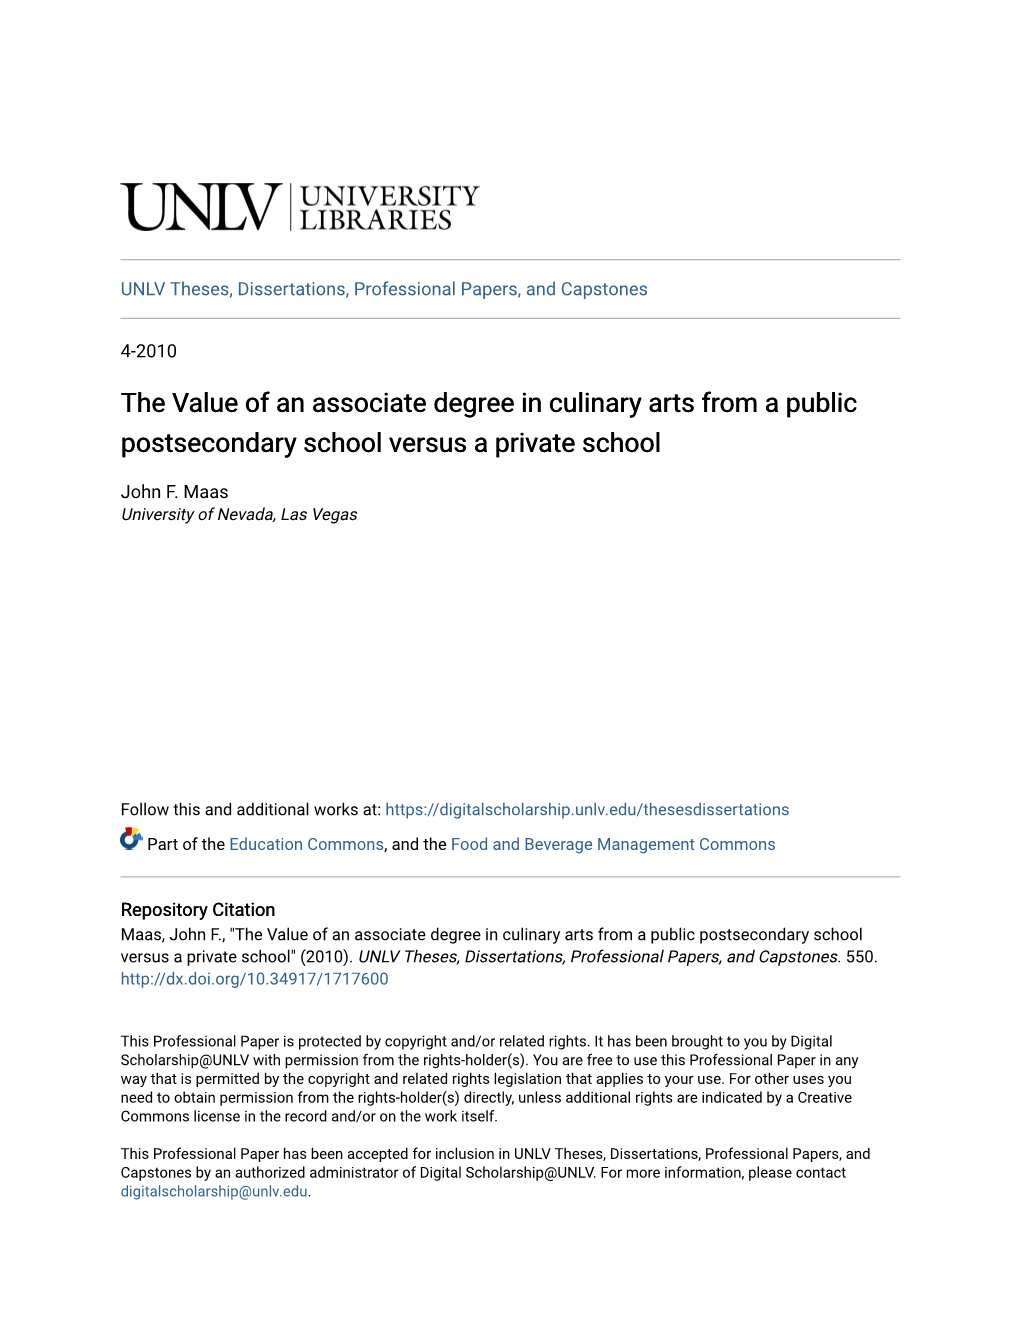 The Value of an Associate Degree in Culinary Arts from a Public Postsecondary School Versus a Private School